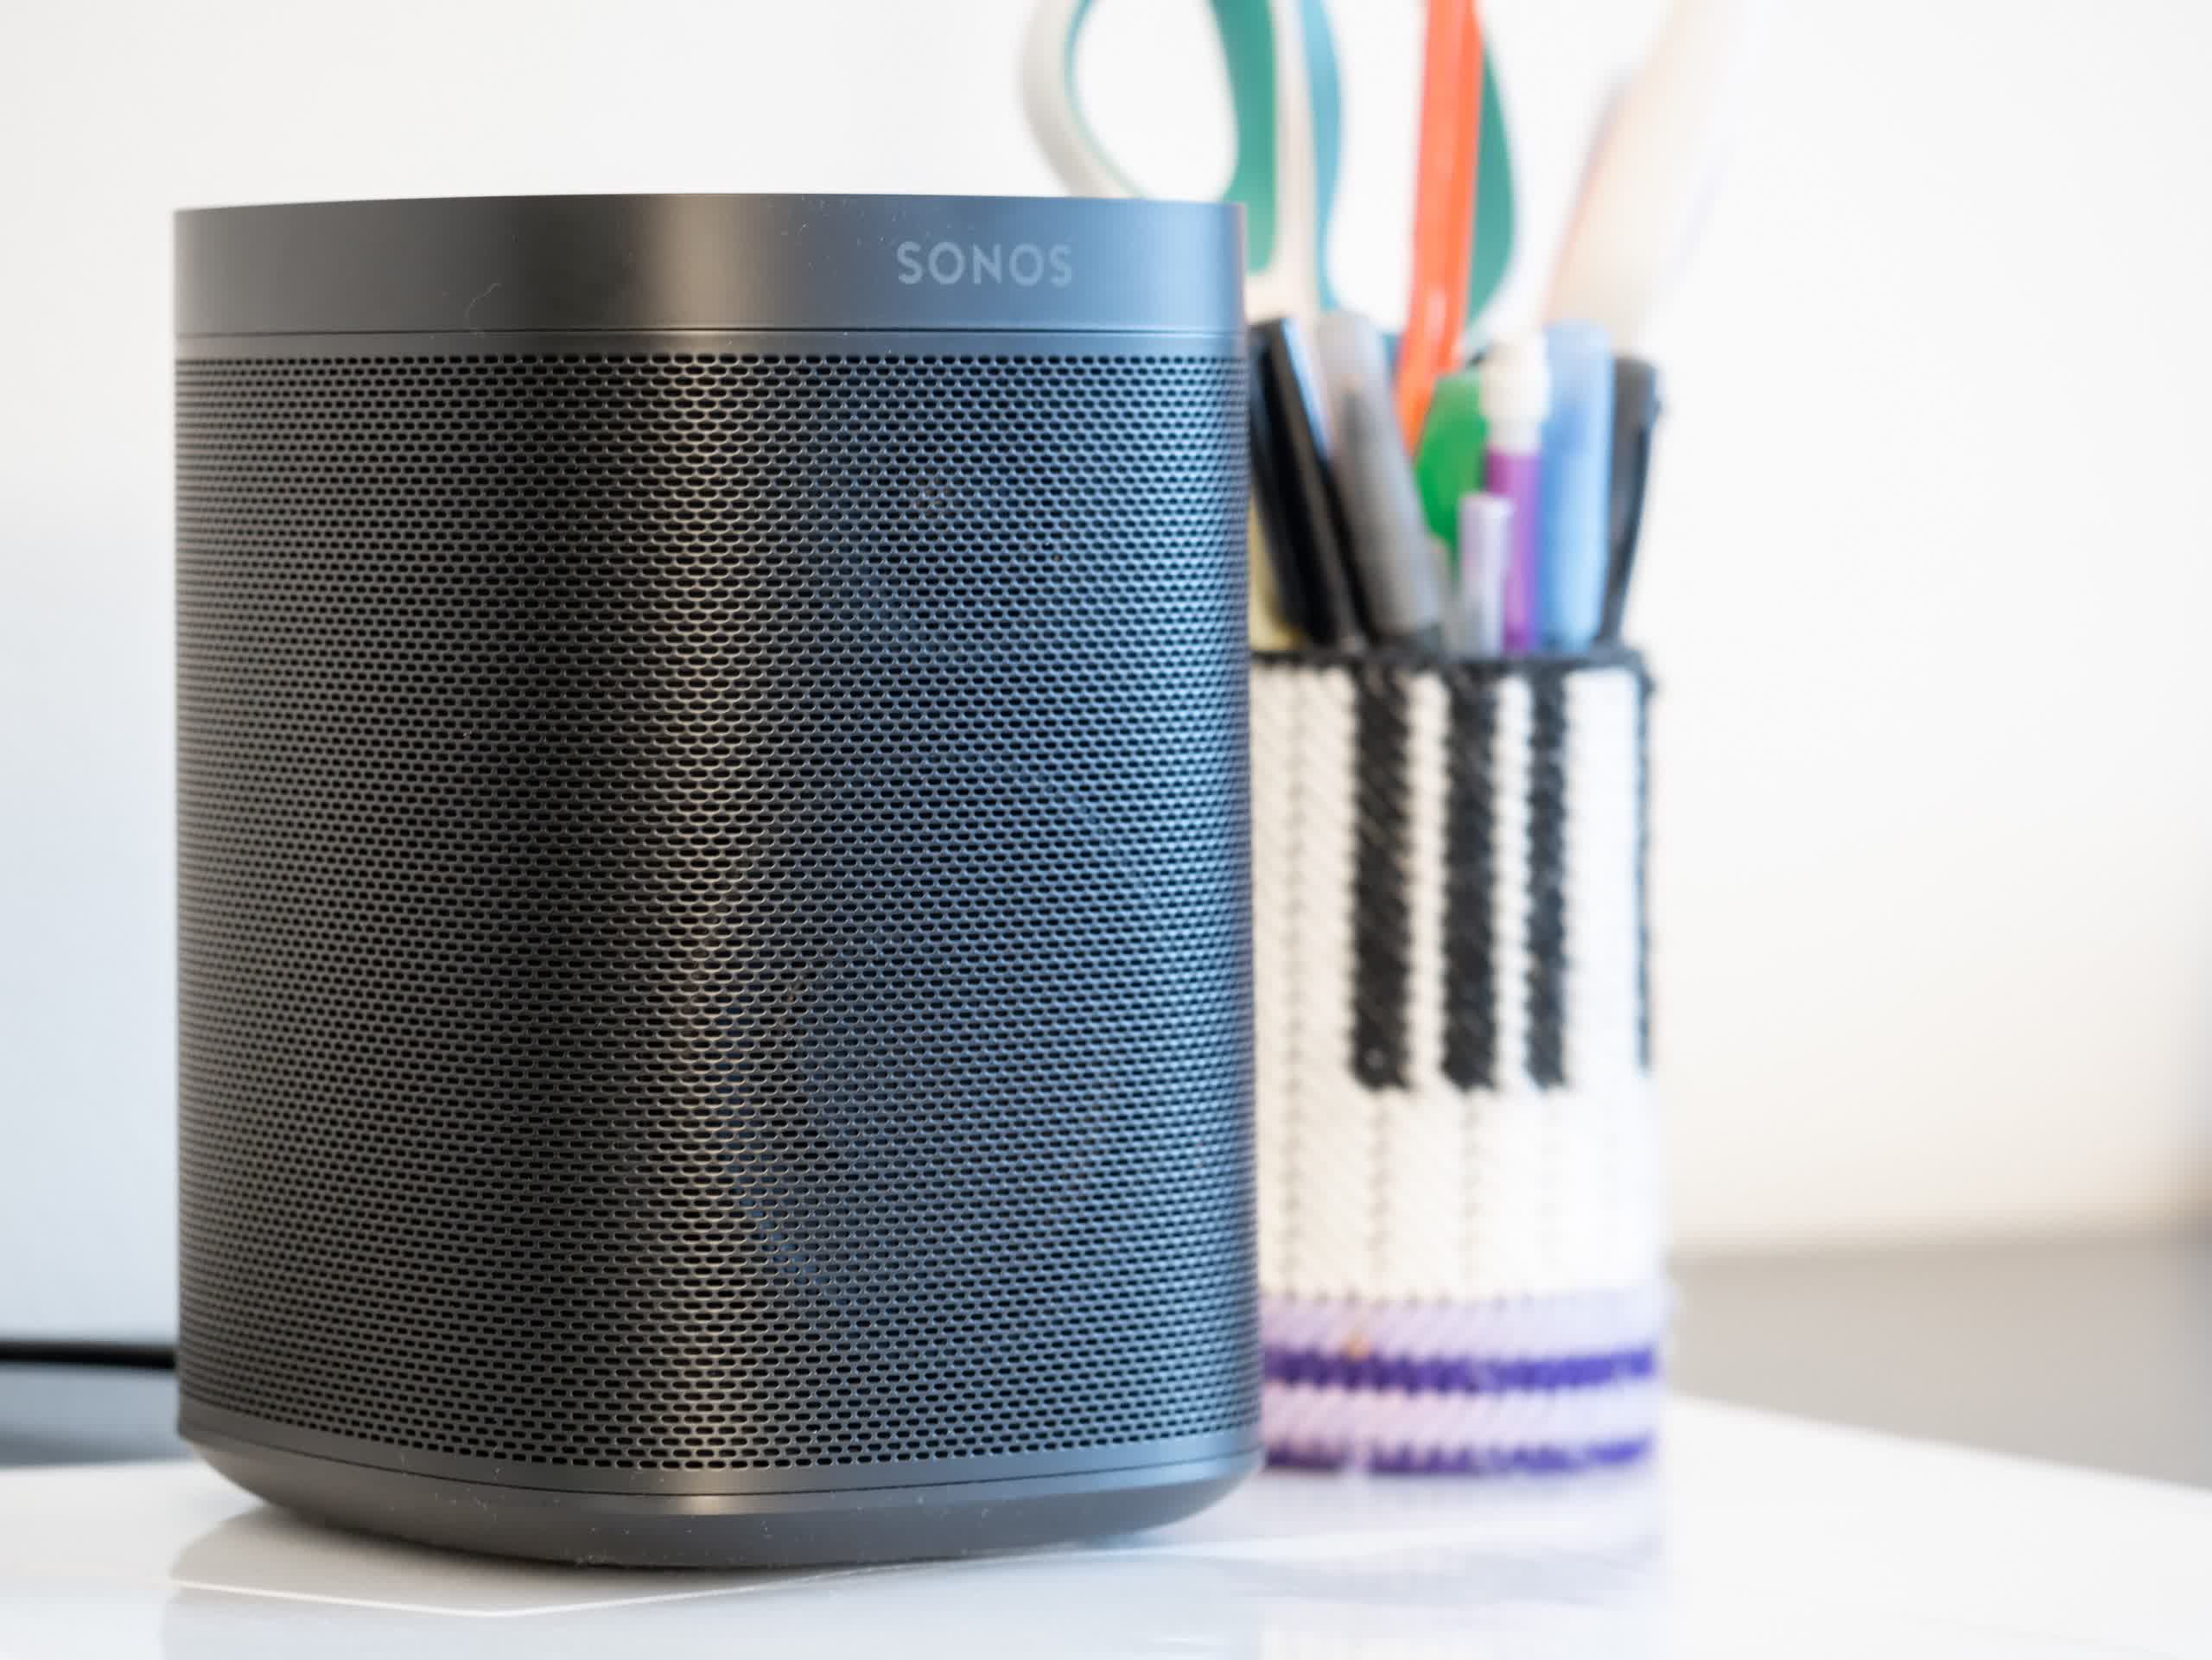 Trade court rules that Google infringed on Sonos' patents